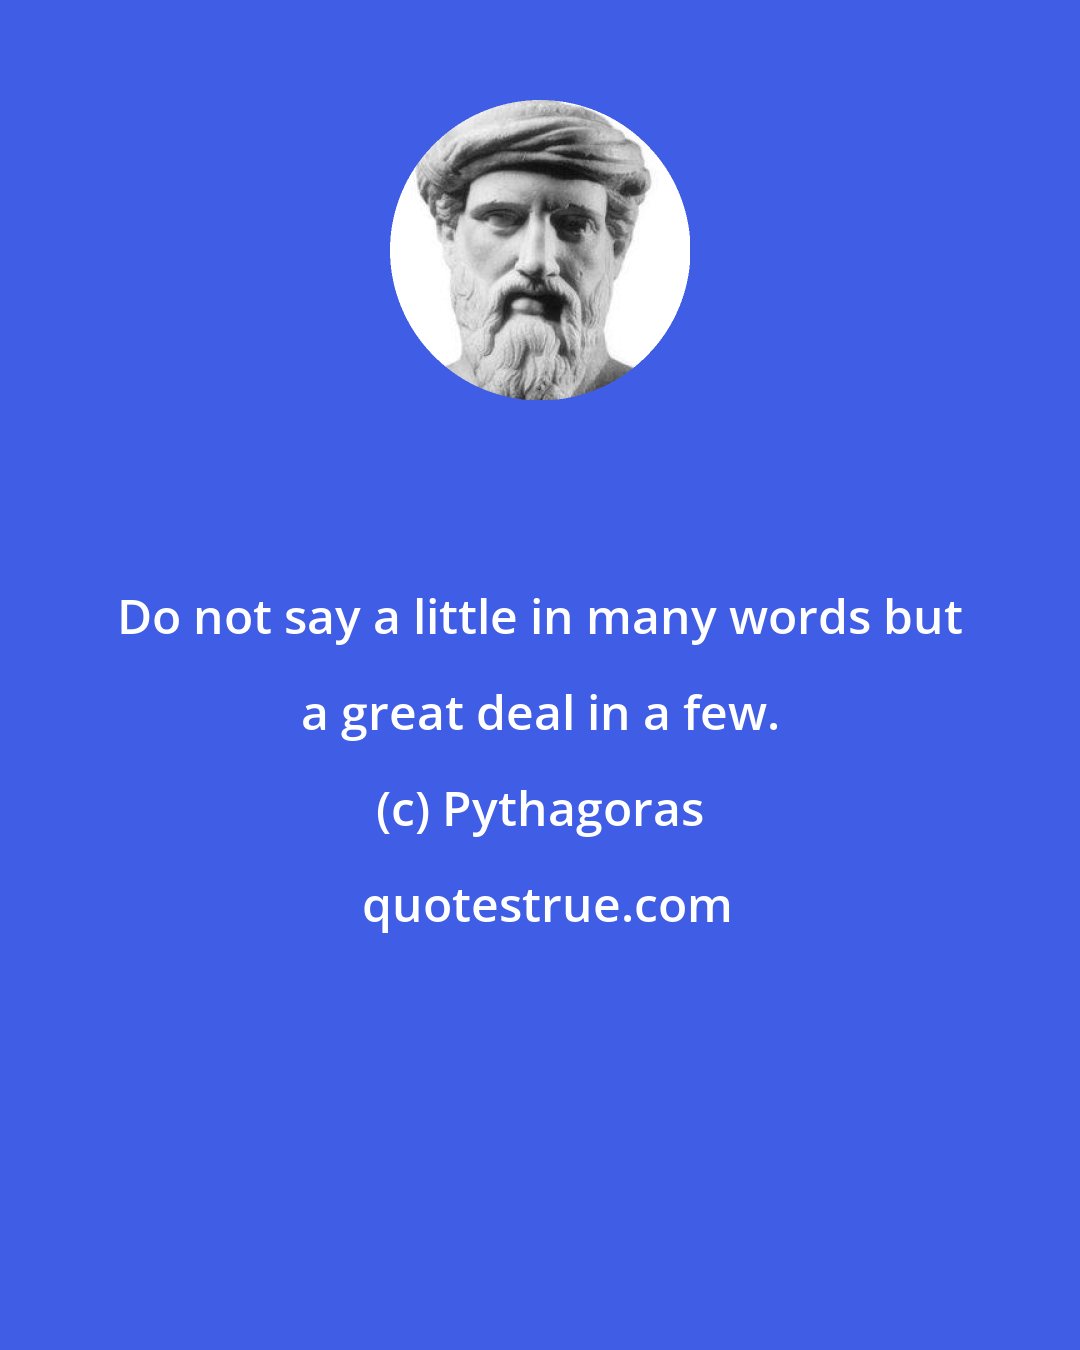 Pythagoras: Do not say a little in many words but a great deal in a few.